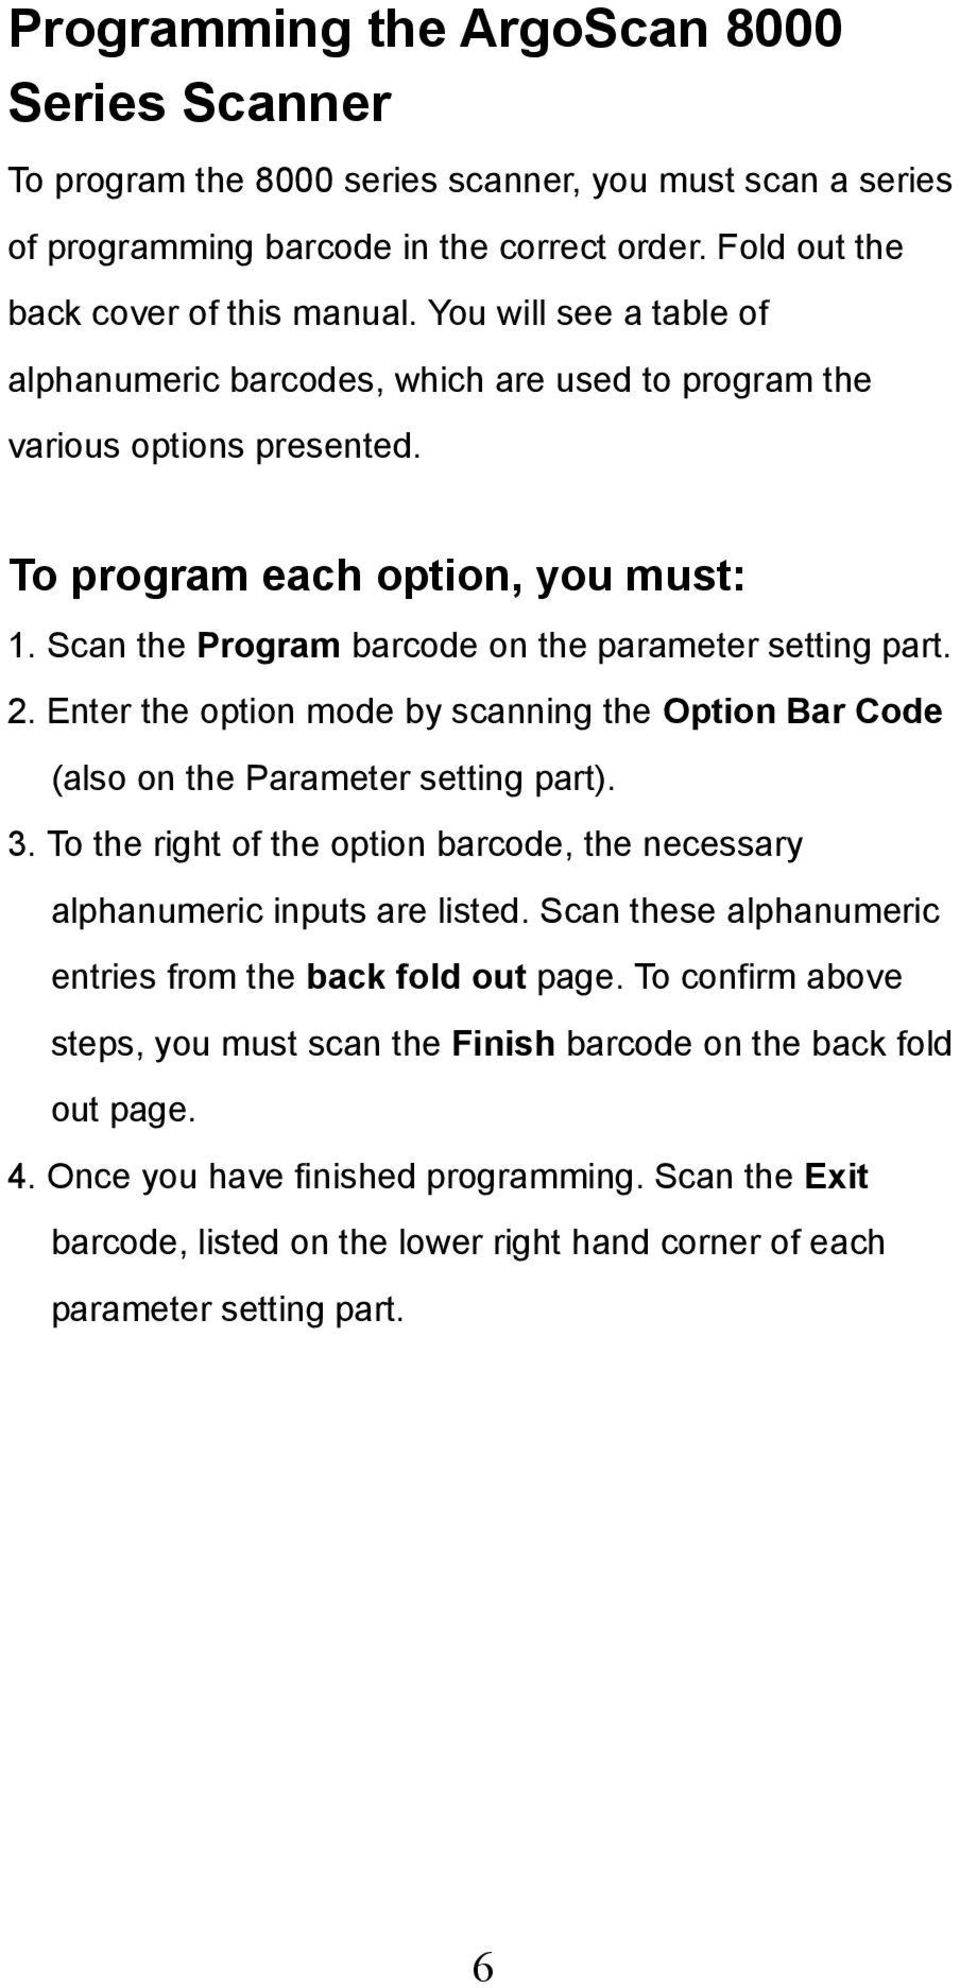 Enter the option mode by scanning the Option Bar Code (also on the Parameter setting part). 3. To the right of the option barcode, the necessary alphanumeric inputs are listed.